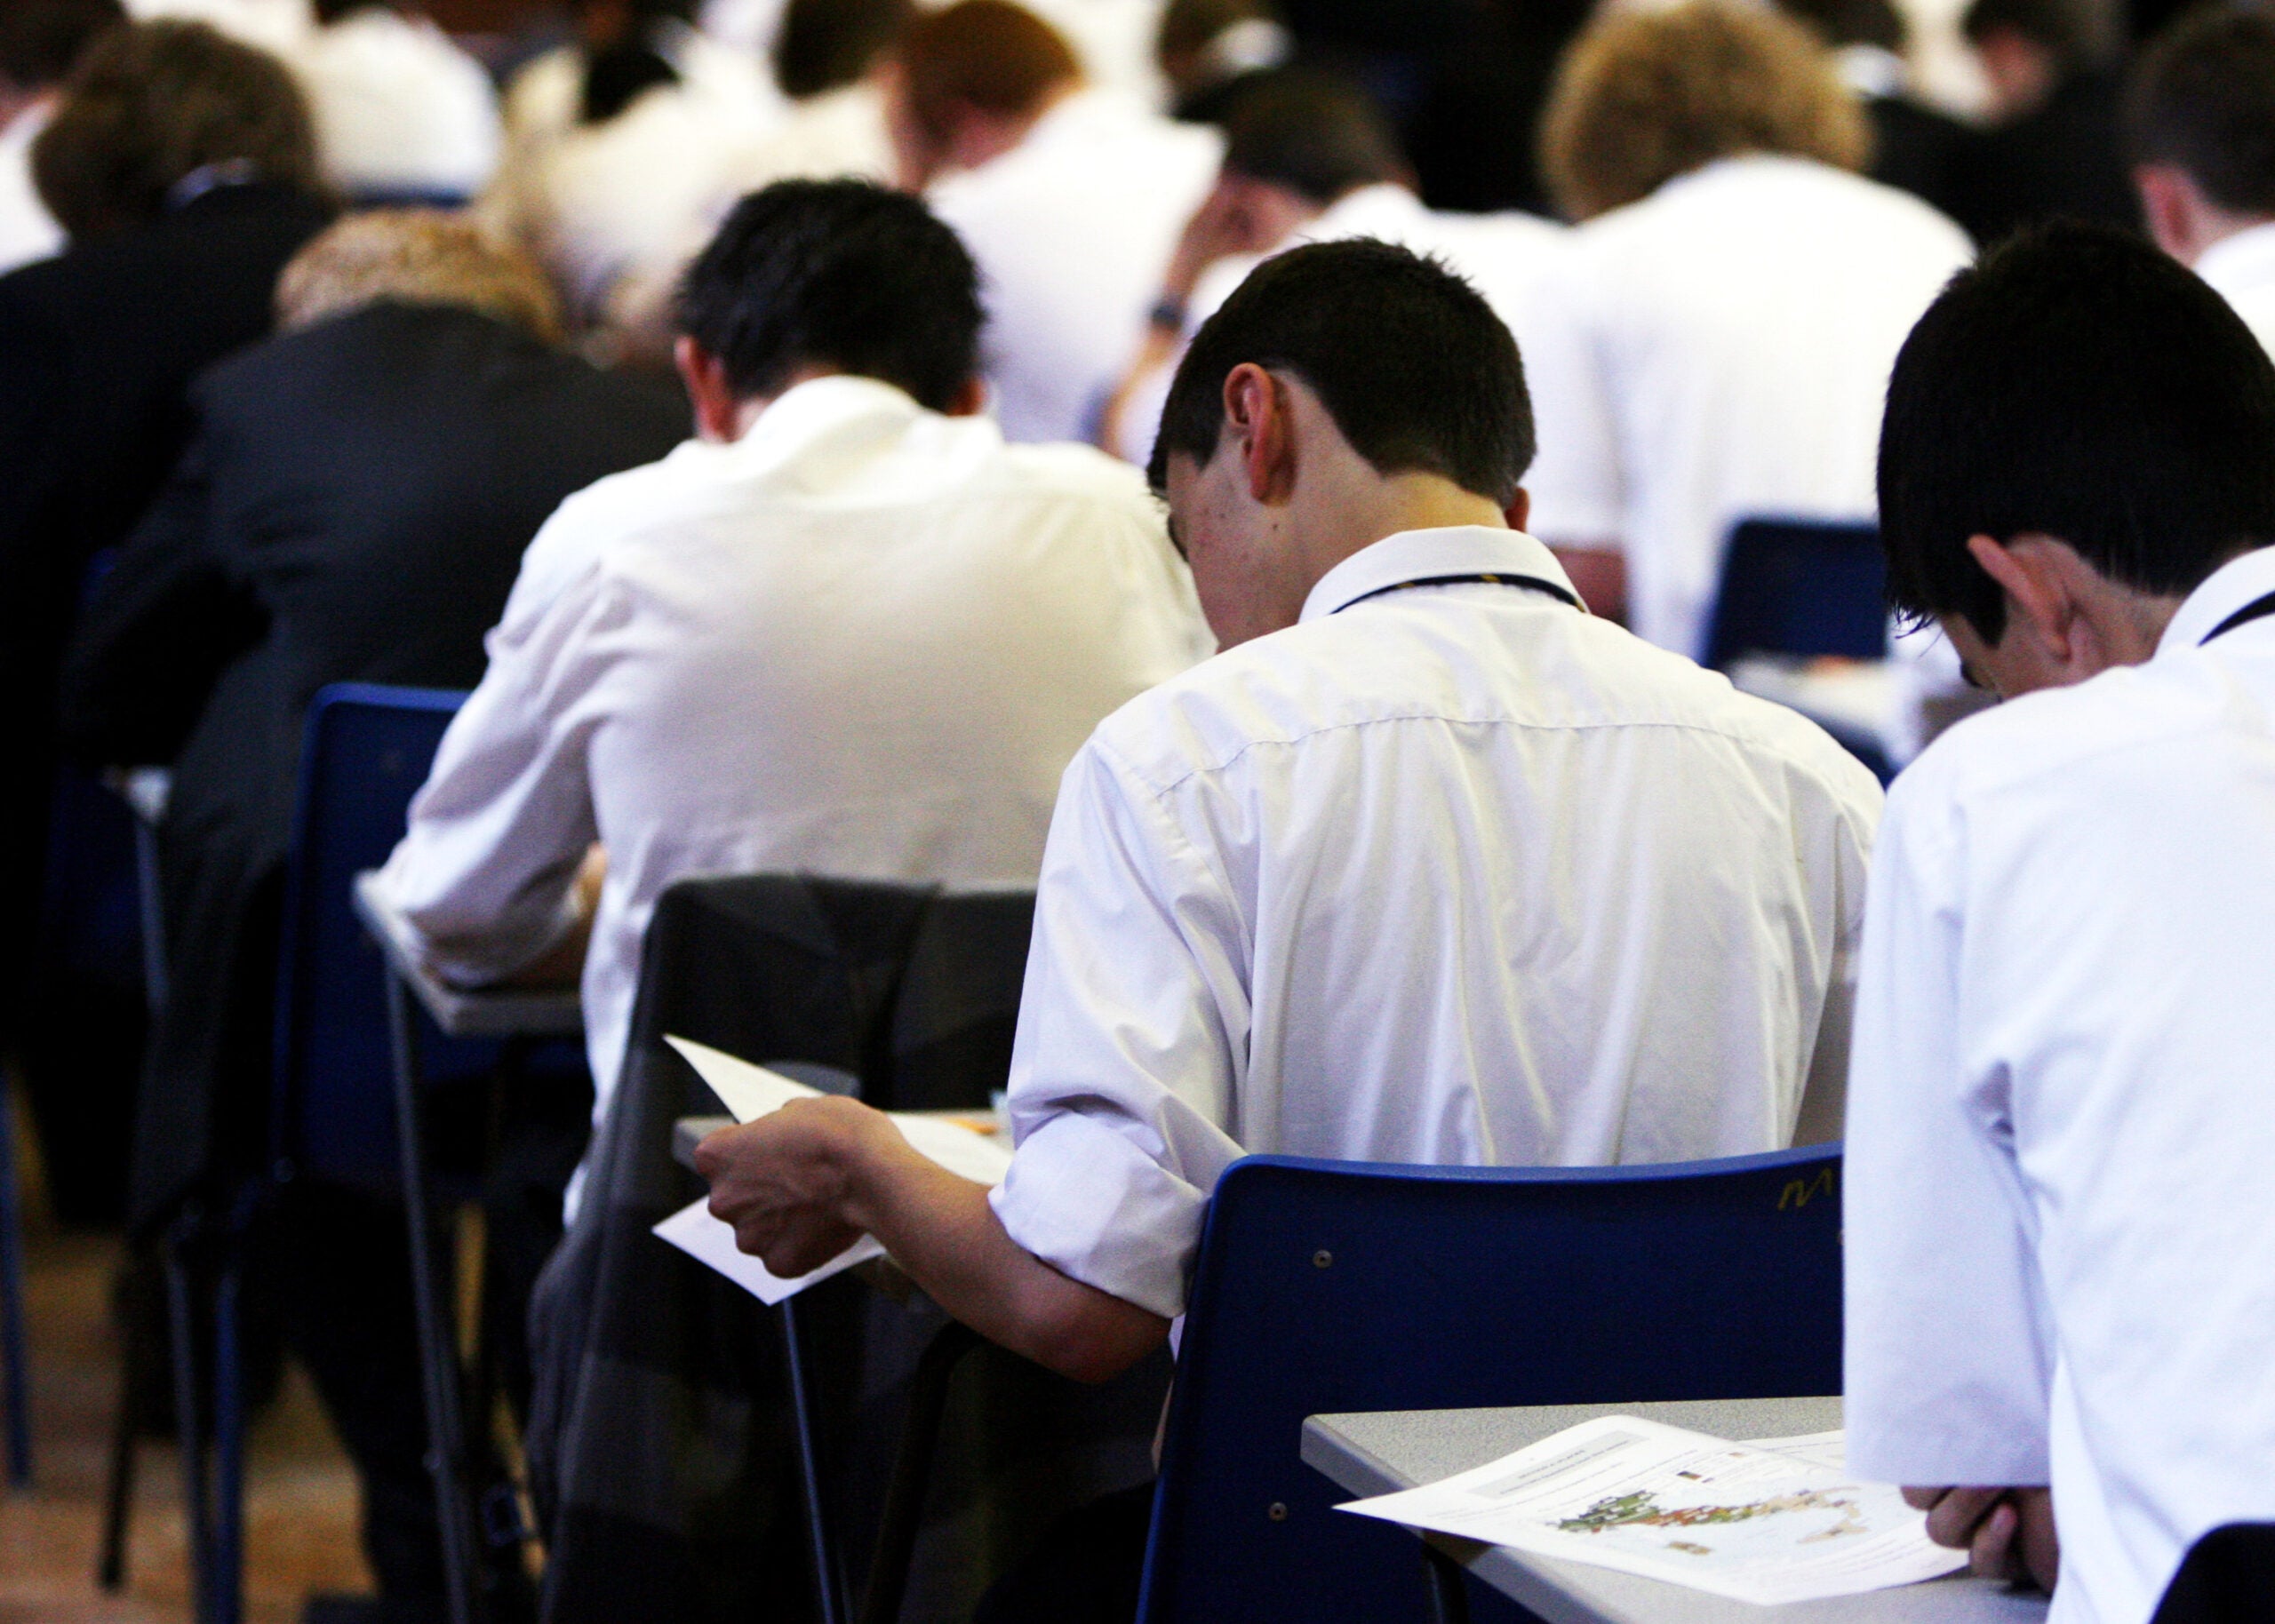 In defence of GCSEs and A-levels